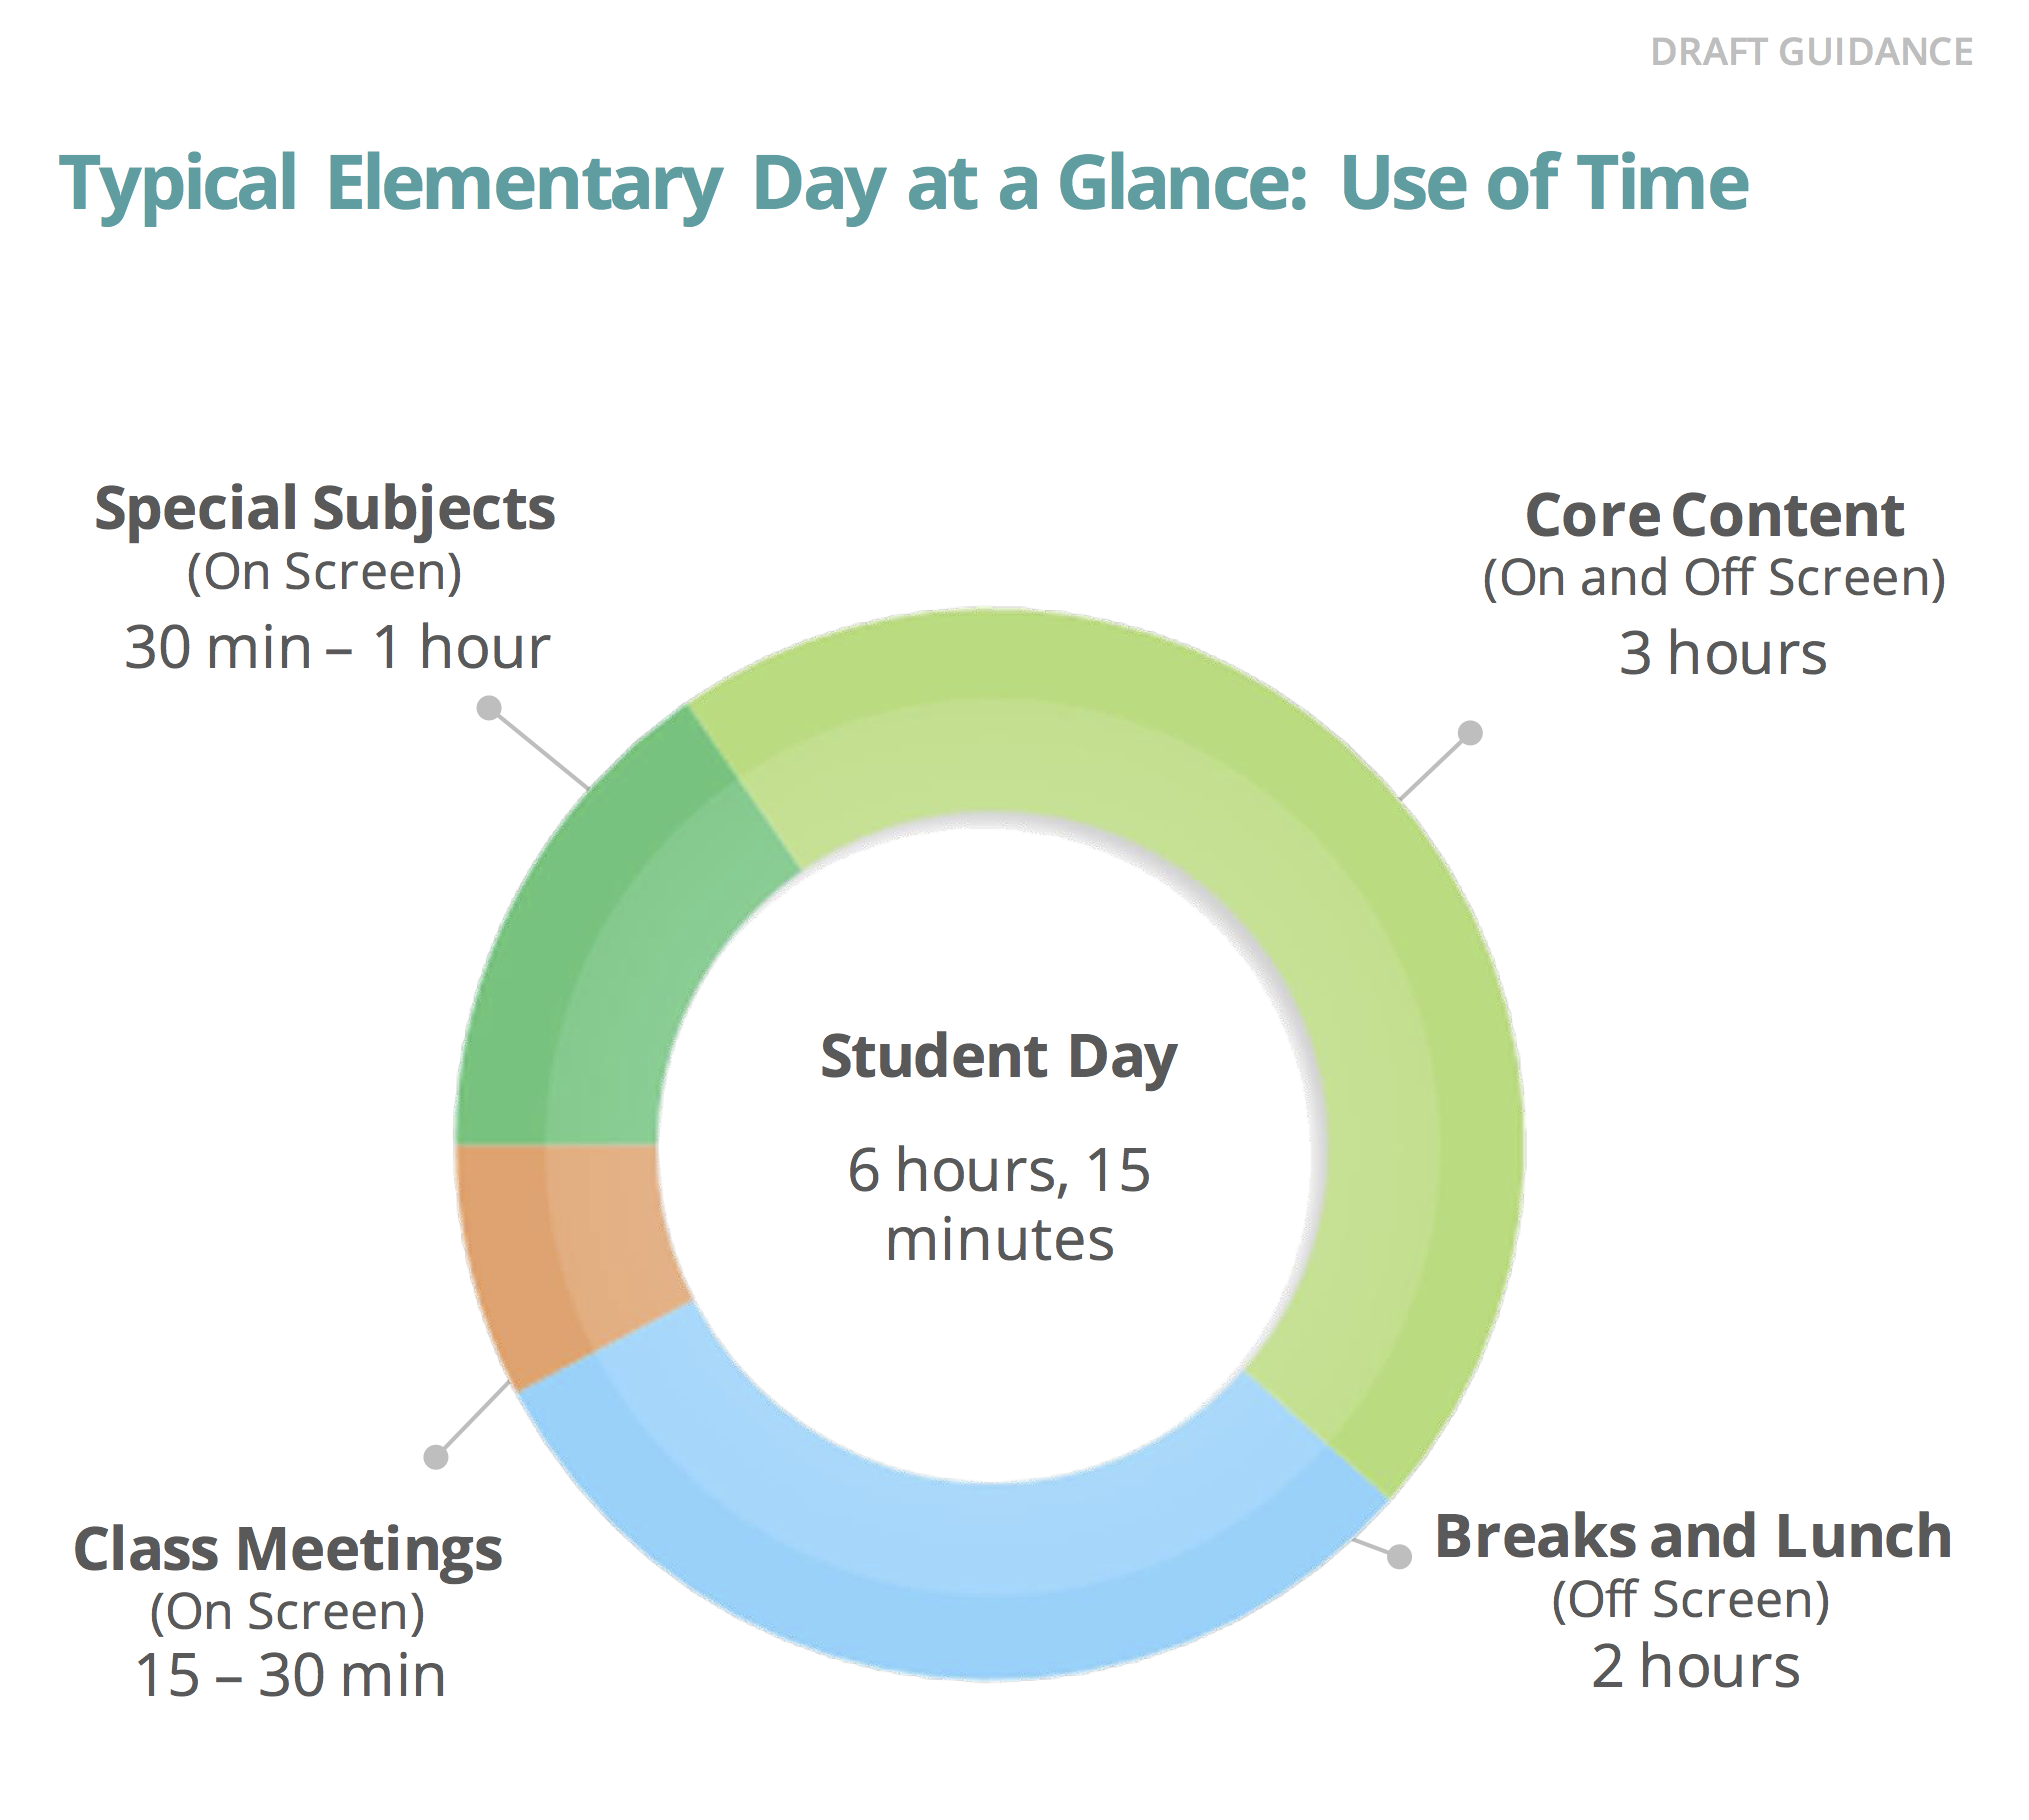 Figure 3. Typical Elementary Day at a Glance, Montgomery County Schools, MD